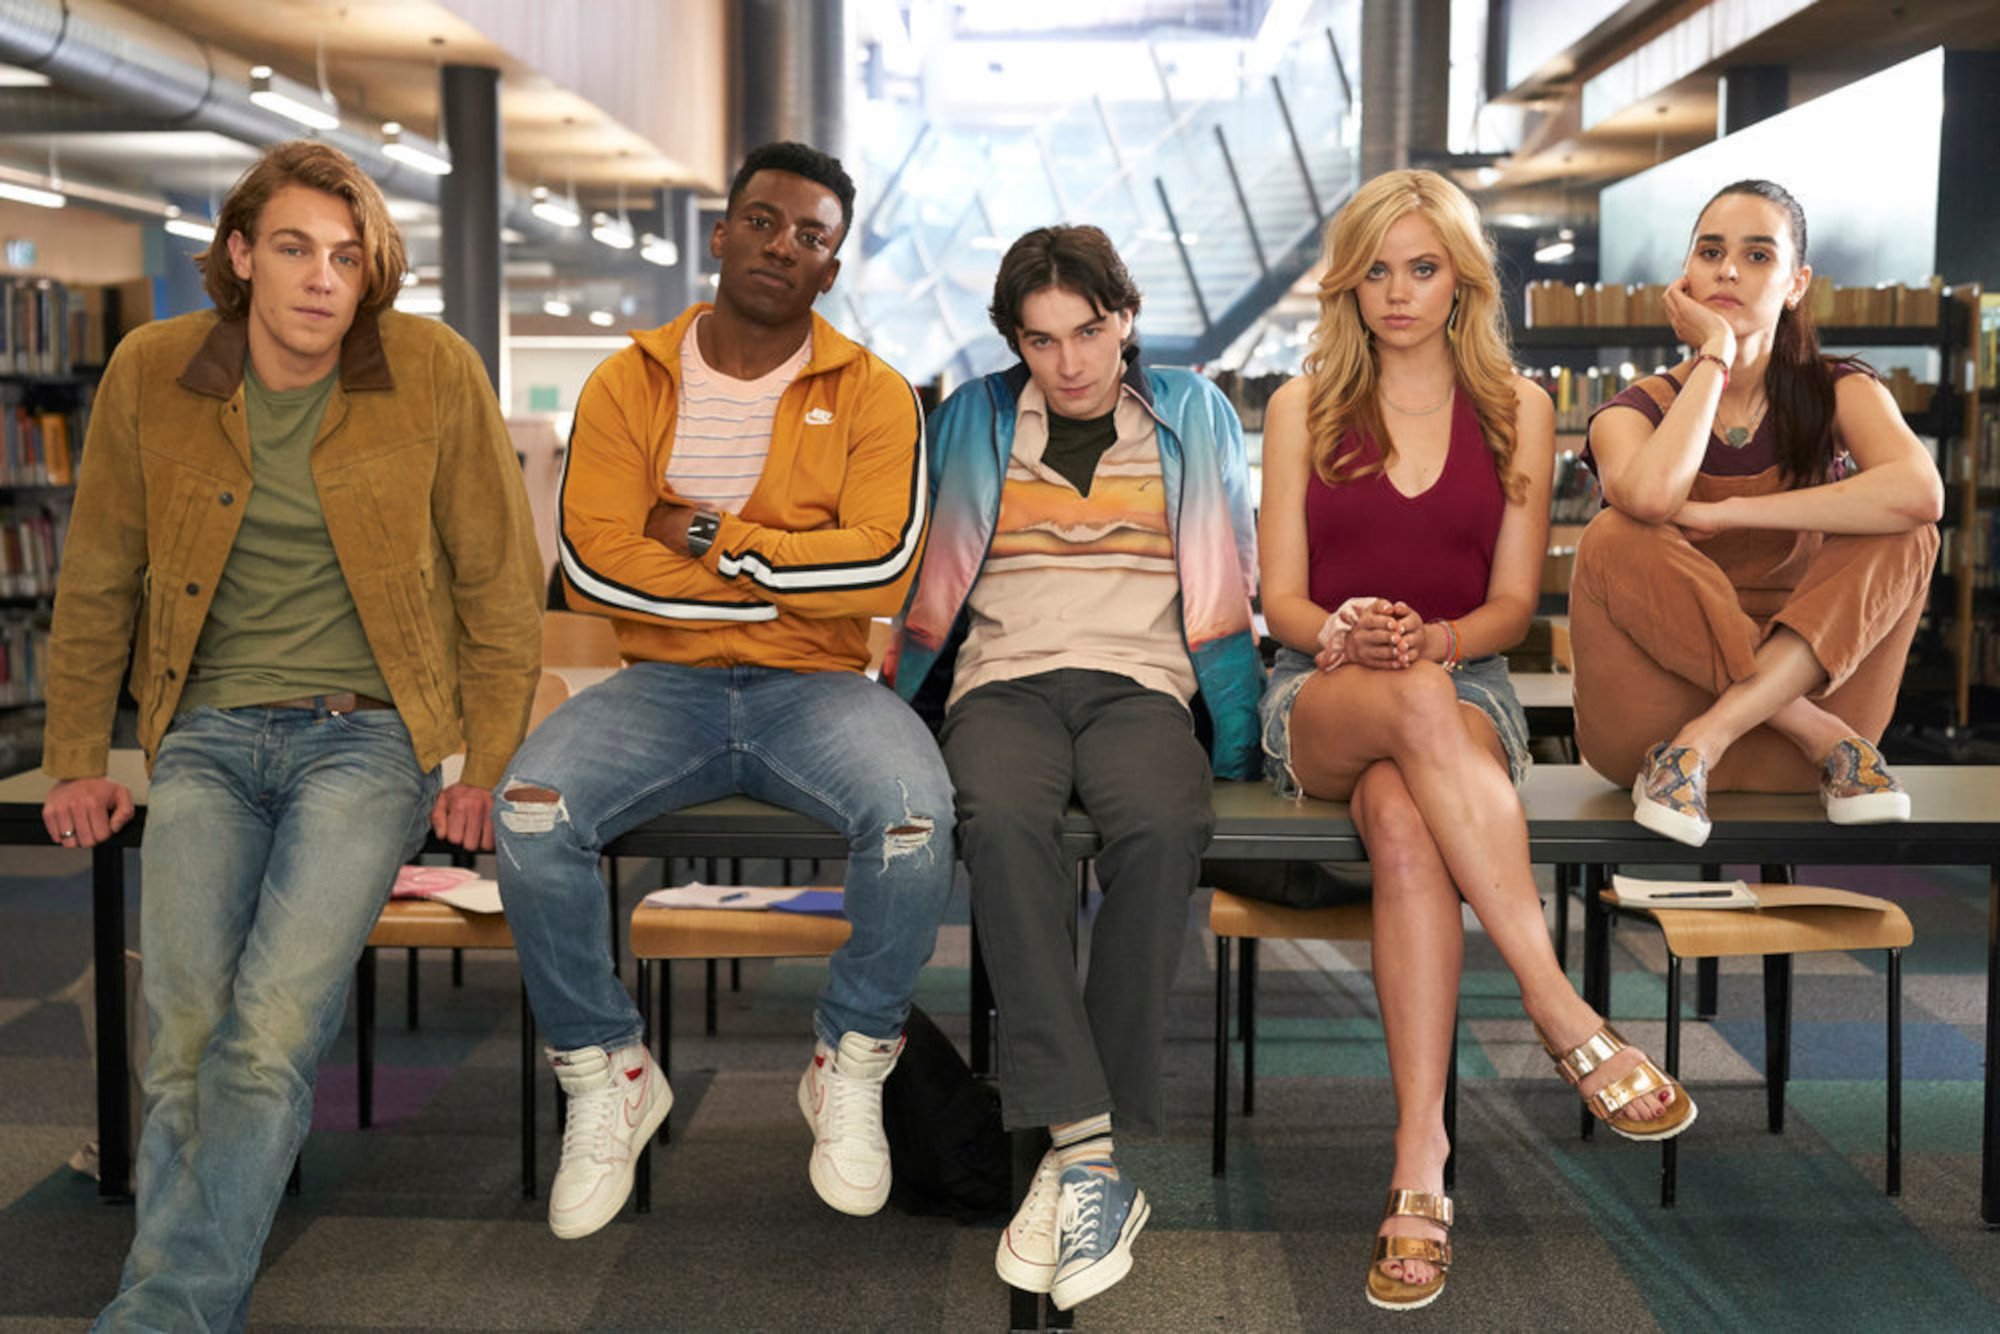 Cooper van Grootel as Nate, Chibuikem Uche as Cooper, Mark McKenna as Simon, Annalisa Cochrane as Addy, and Marianly Tejada as Bronwyn in 'One of Us Is Lying,' which is scheduled for a season 2 release date in October 2022.